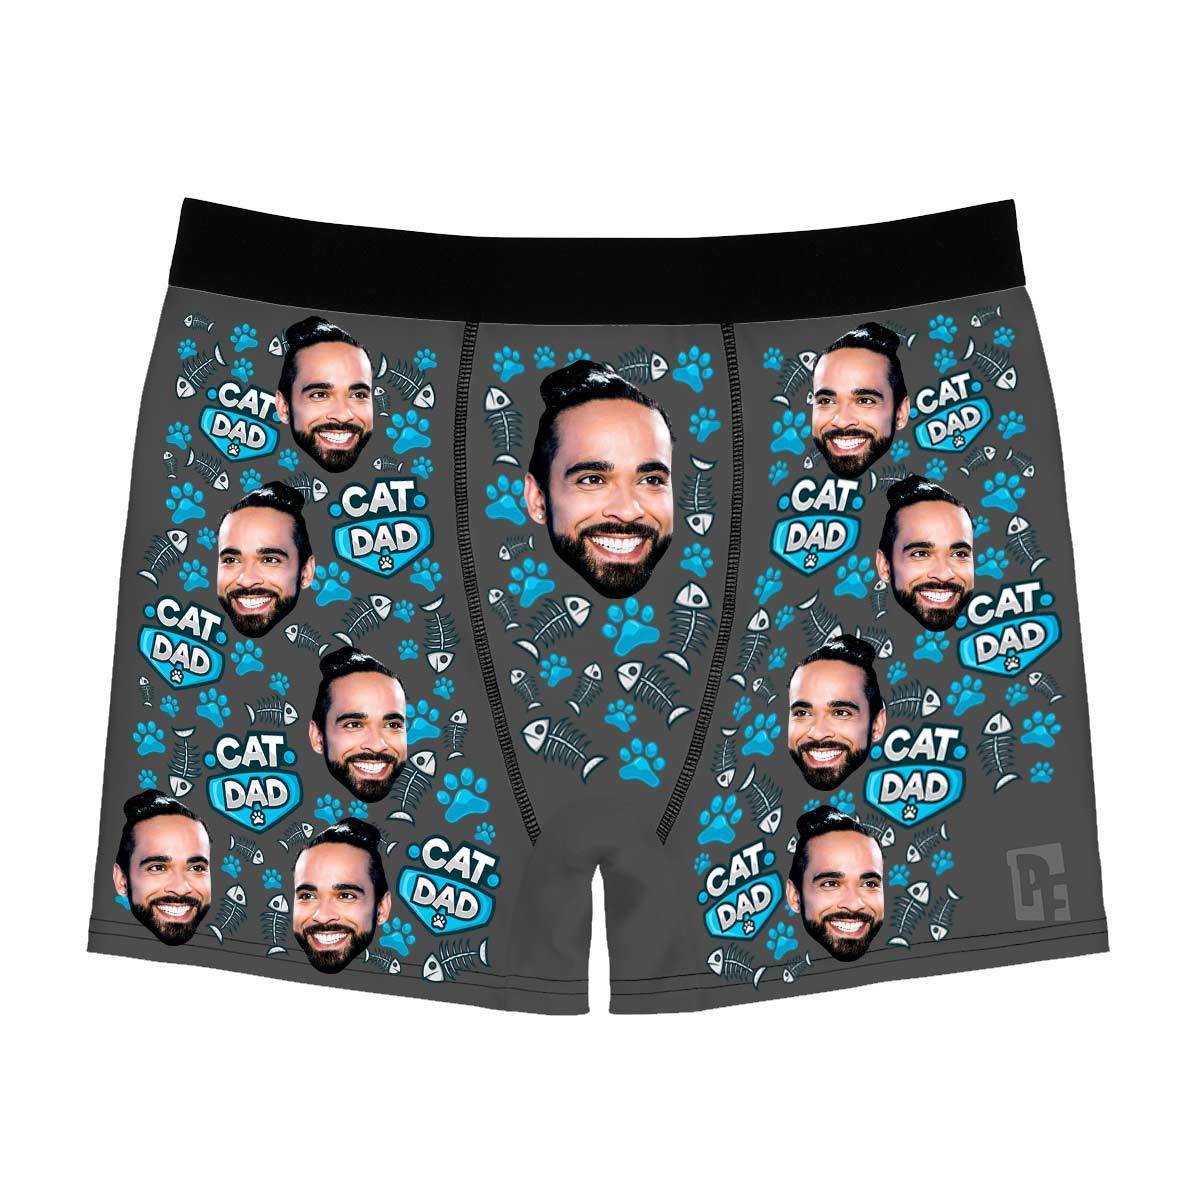 Dark Cat dad men's boxer briefs personalized with photo printed on them